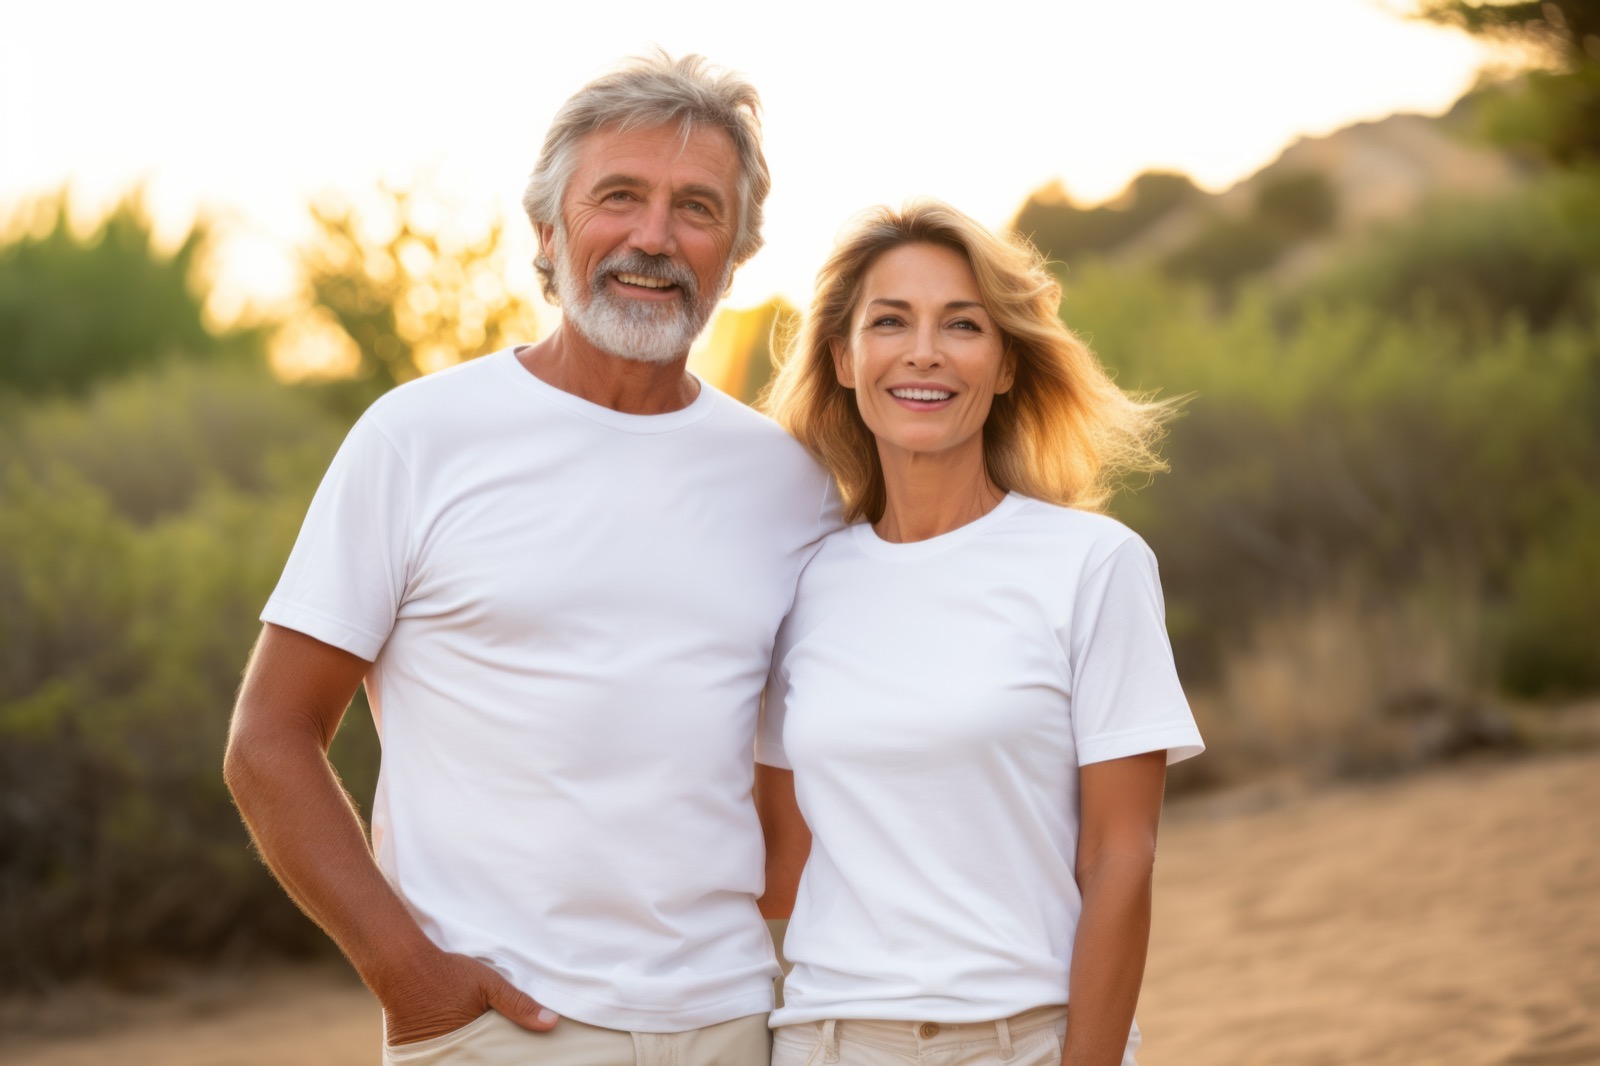 Mature couple in matching shirts smiling